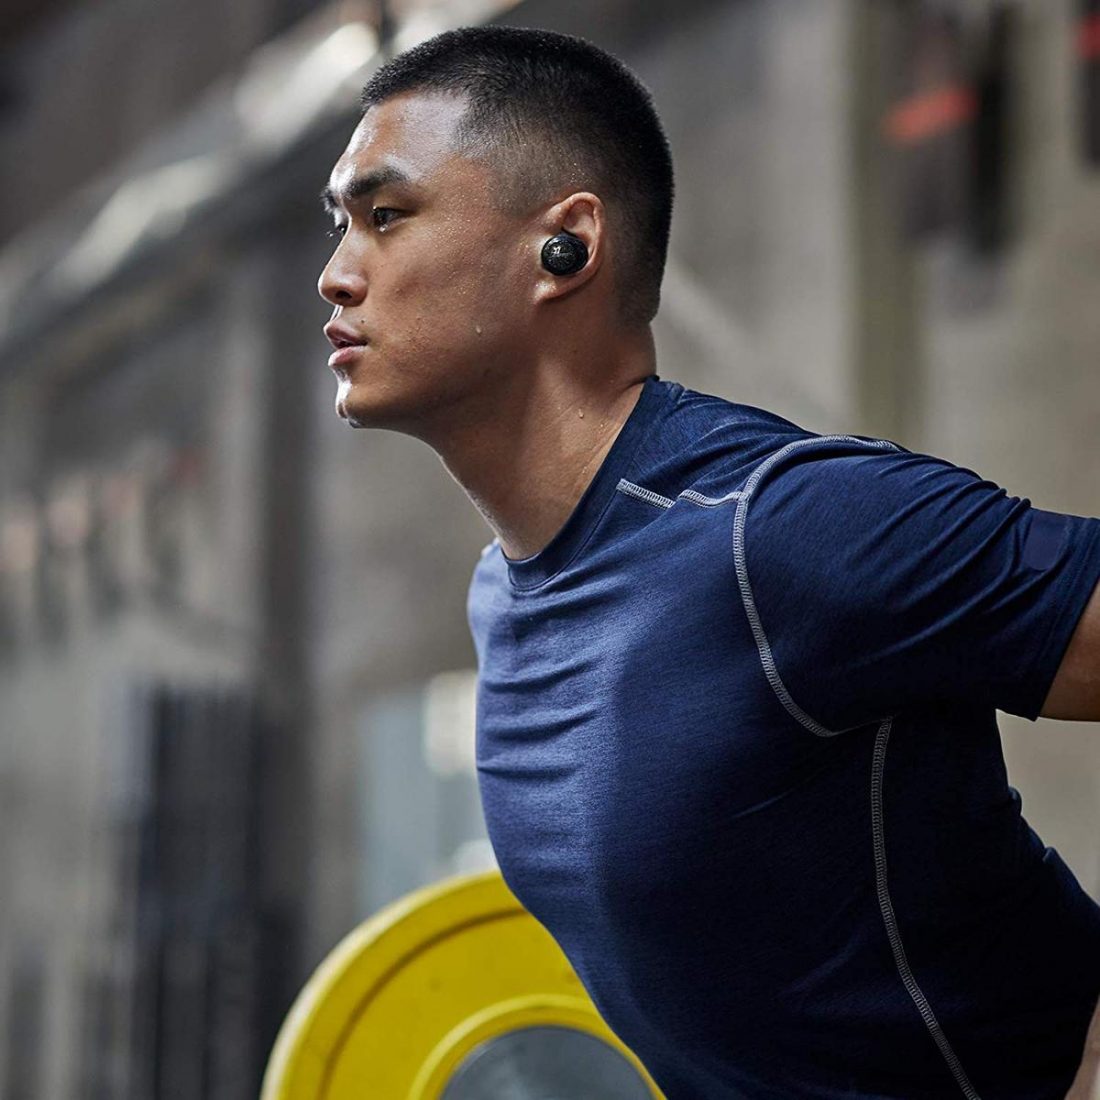 Are Bose and Beats Headphones Good for Working Out? - Headphonesty